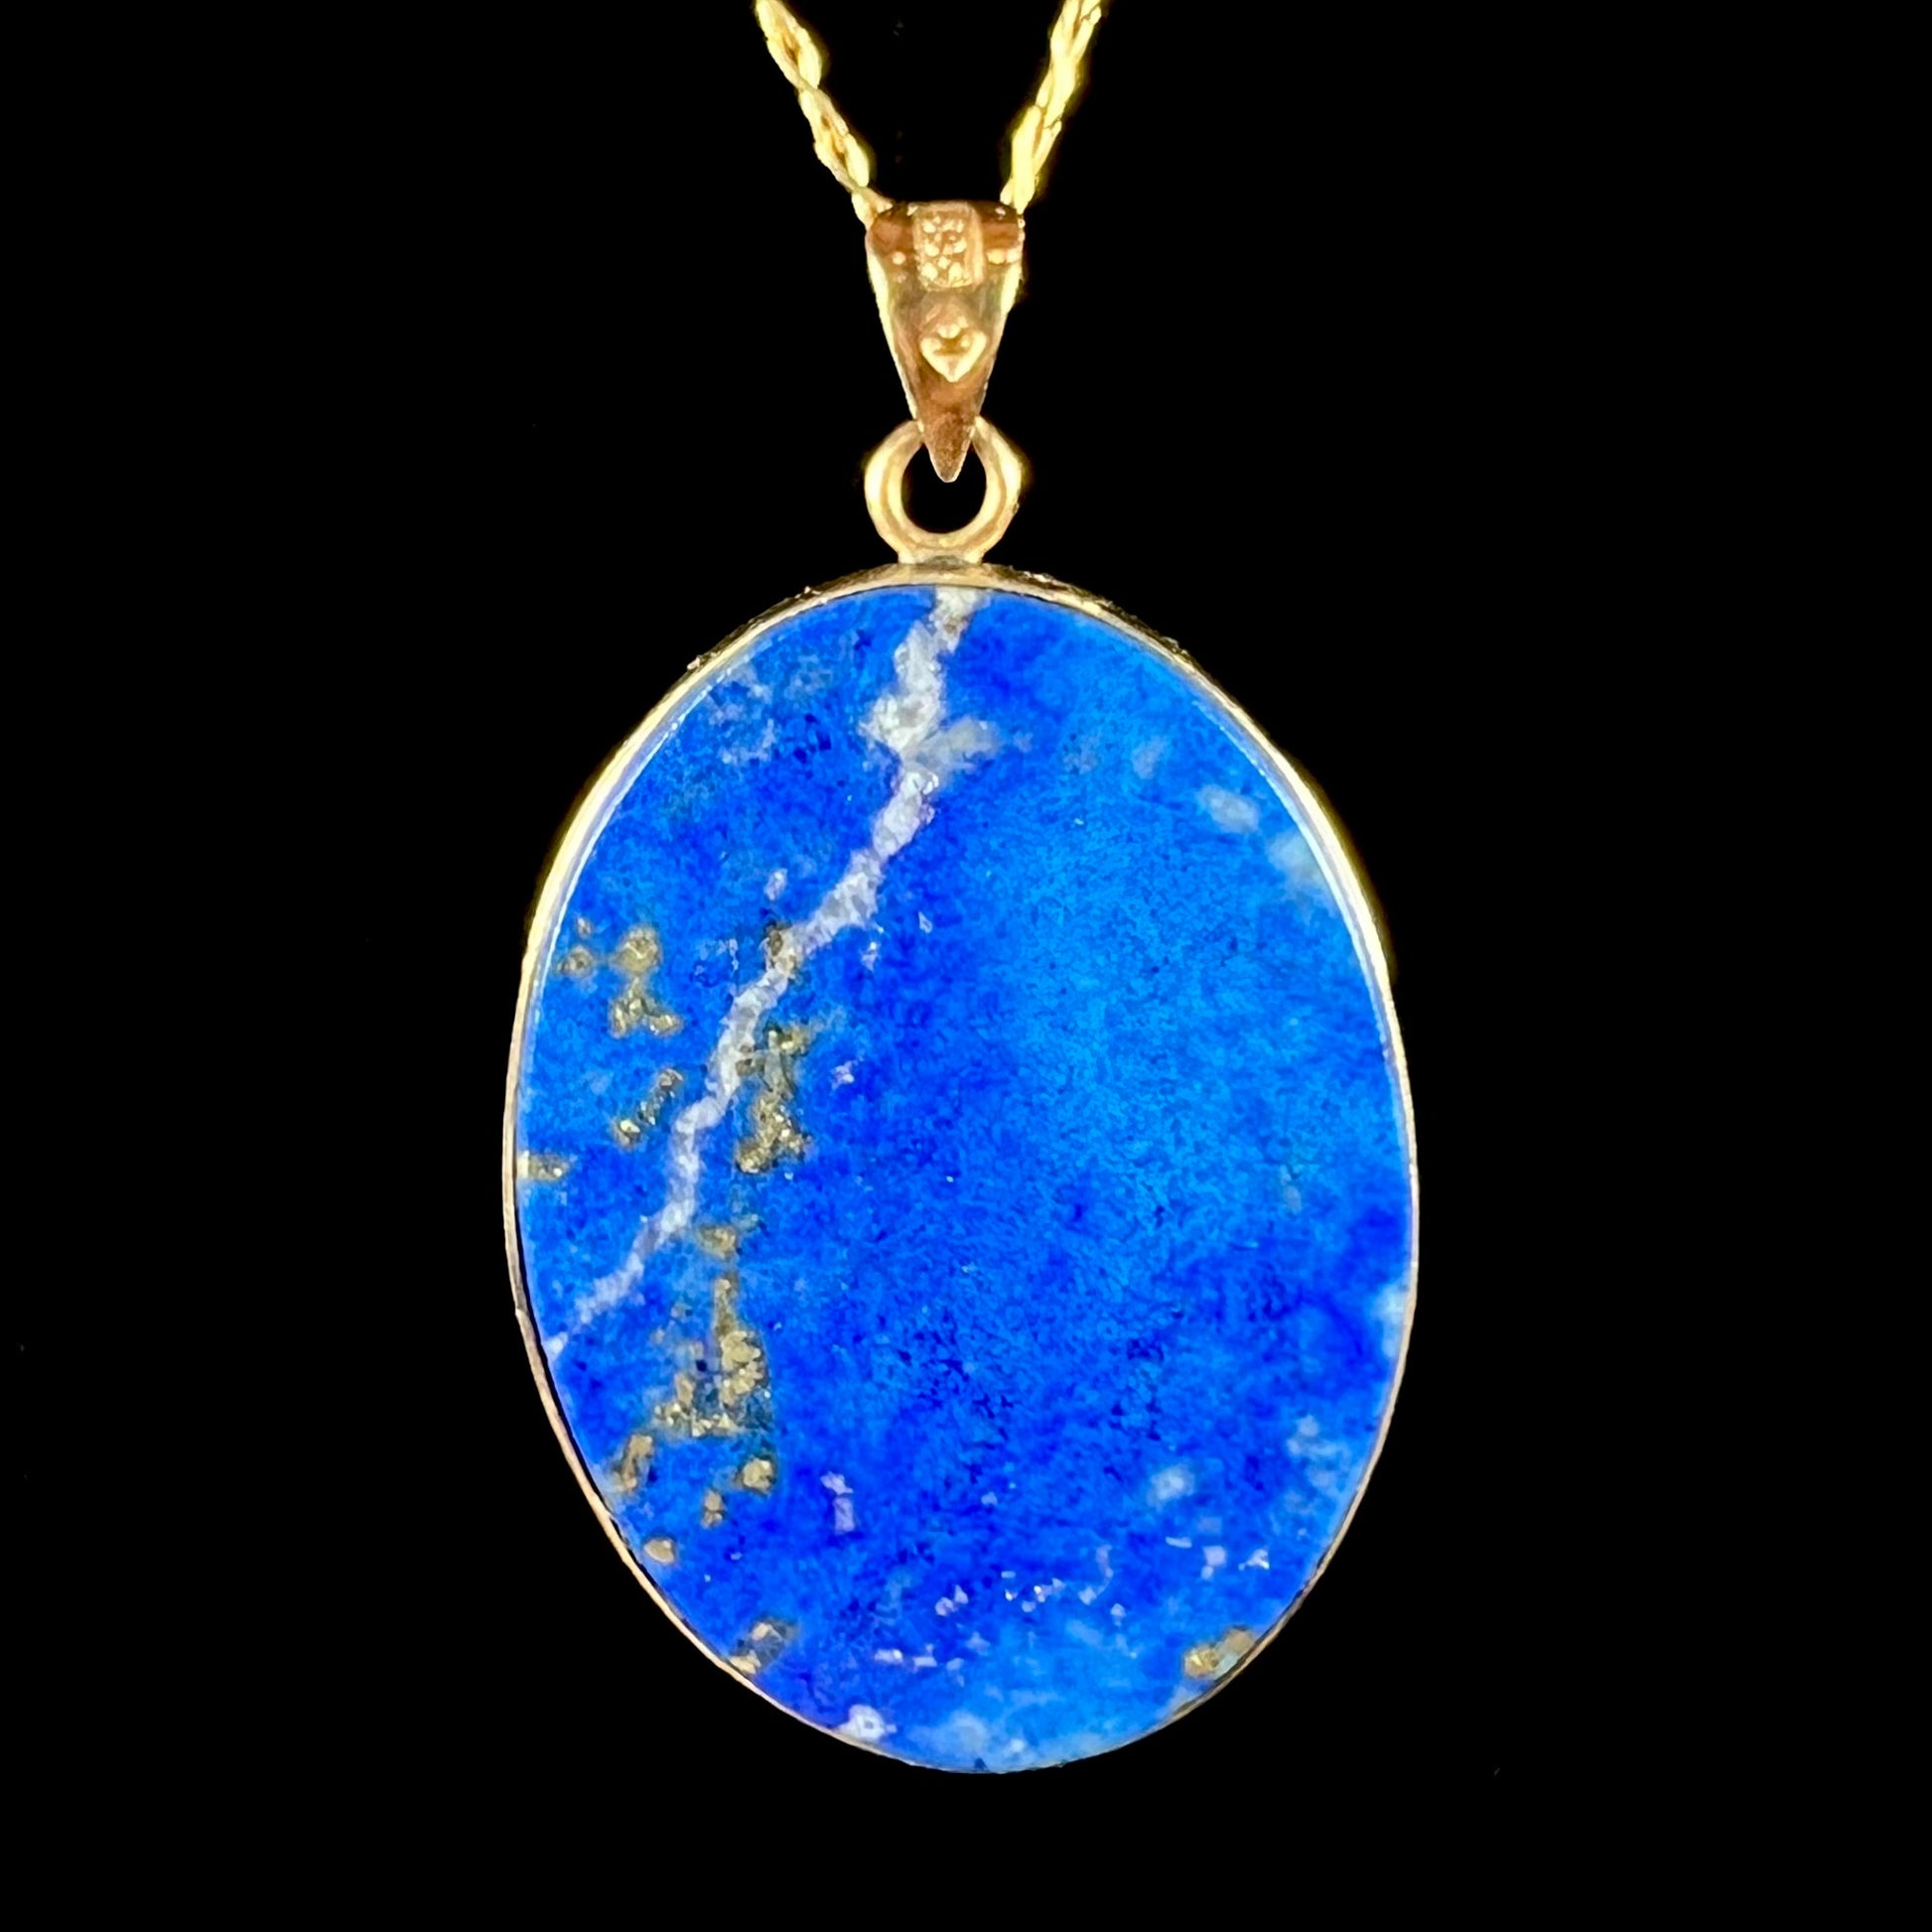 An oval cut lapis lazuli pendant set in a yellow gold frame featuring the design of two swans swimming in a pond.